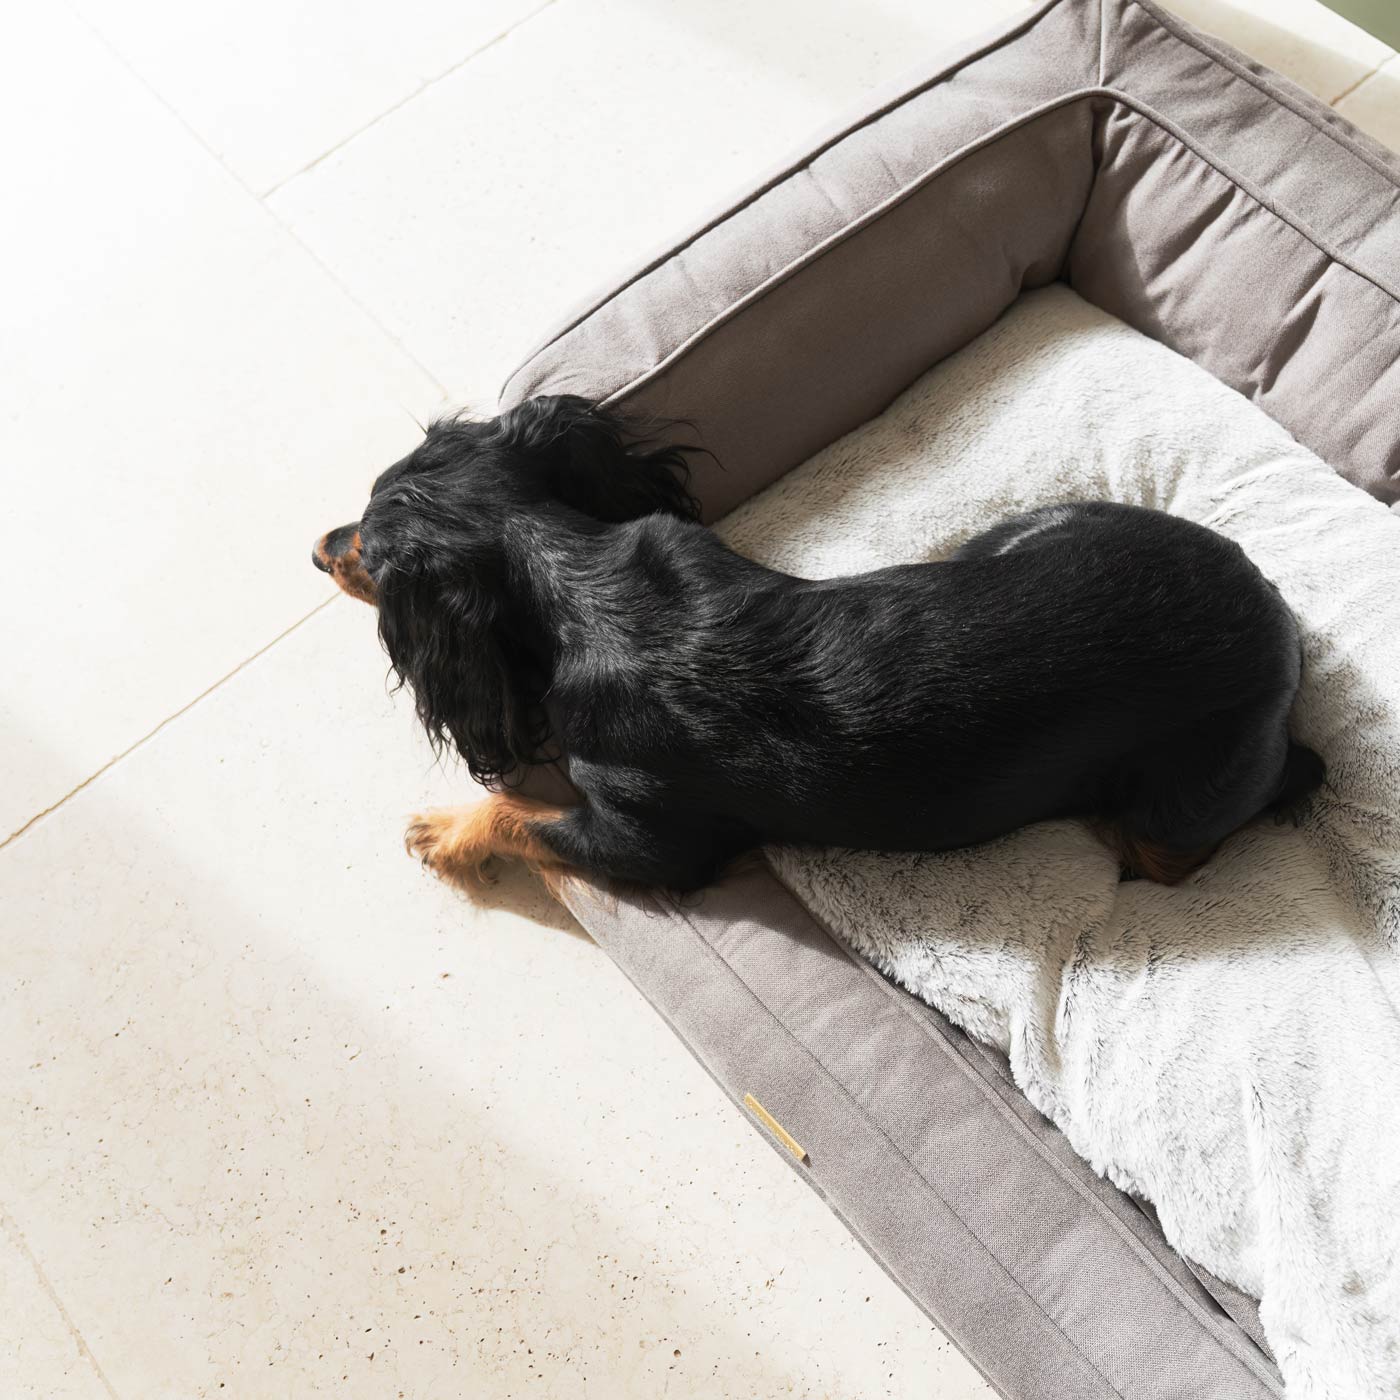 Present Your Furry Friend with the Perfect Dog Bed for The Ultimate Pet Nap-Time! Discover Our Luxury Deep Sleep Dog Bed In Stunning Putty! Available Now at Lords & Labradors    